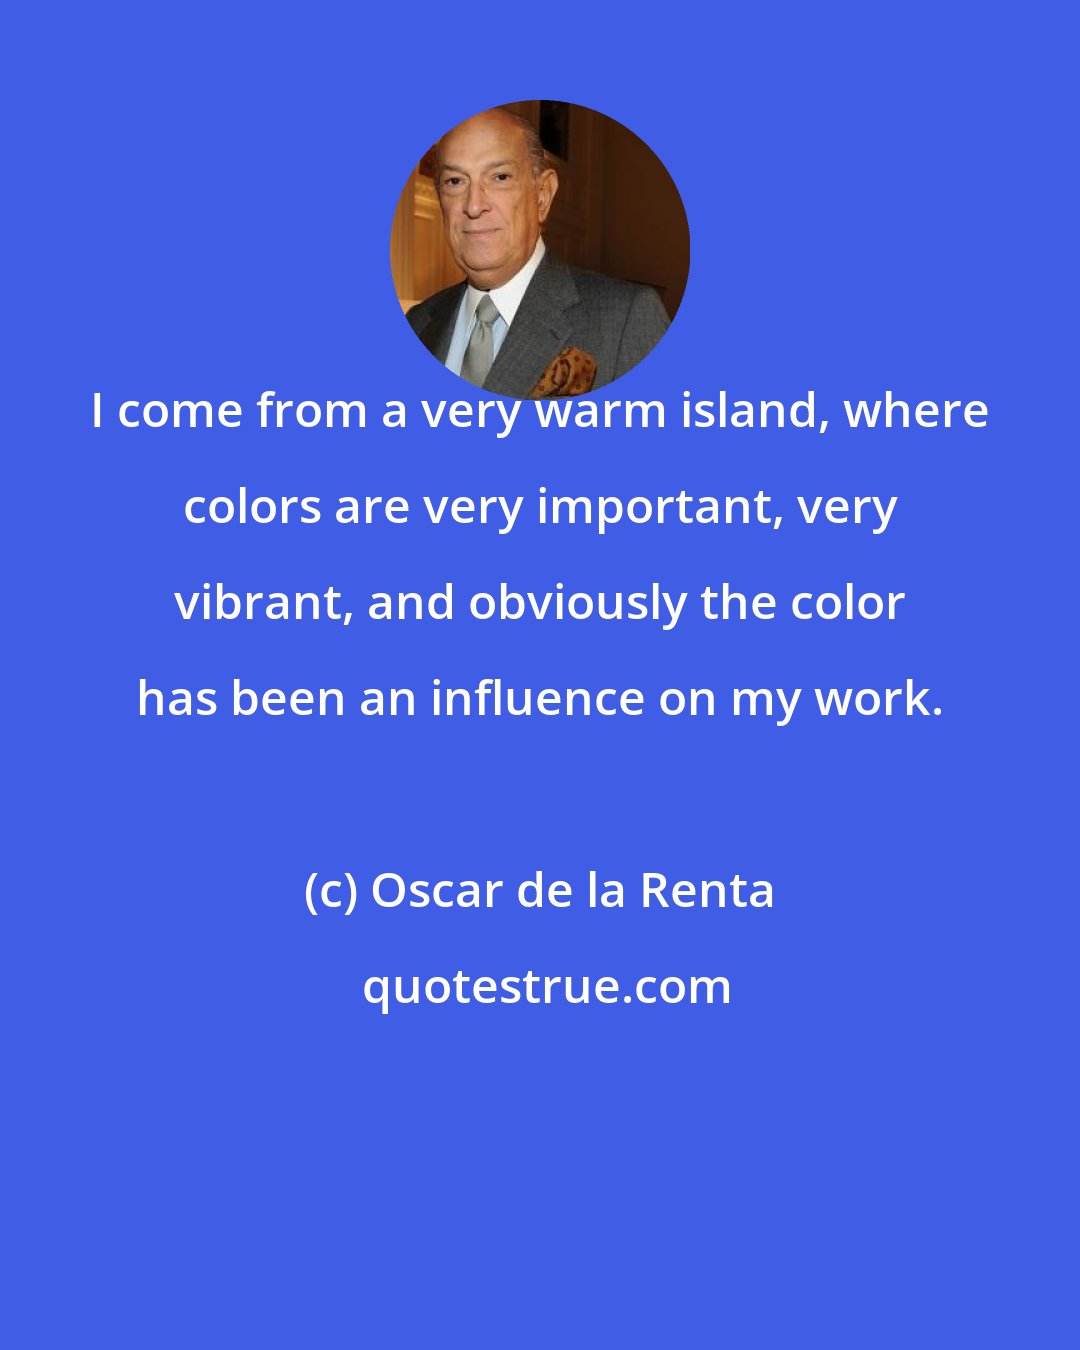 Oscar de la Renta: I come from a very warm island, where colors are very important, very vibrant, and obviously the color has been an influence on my work.